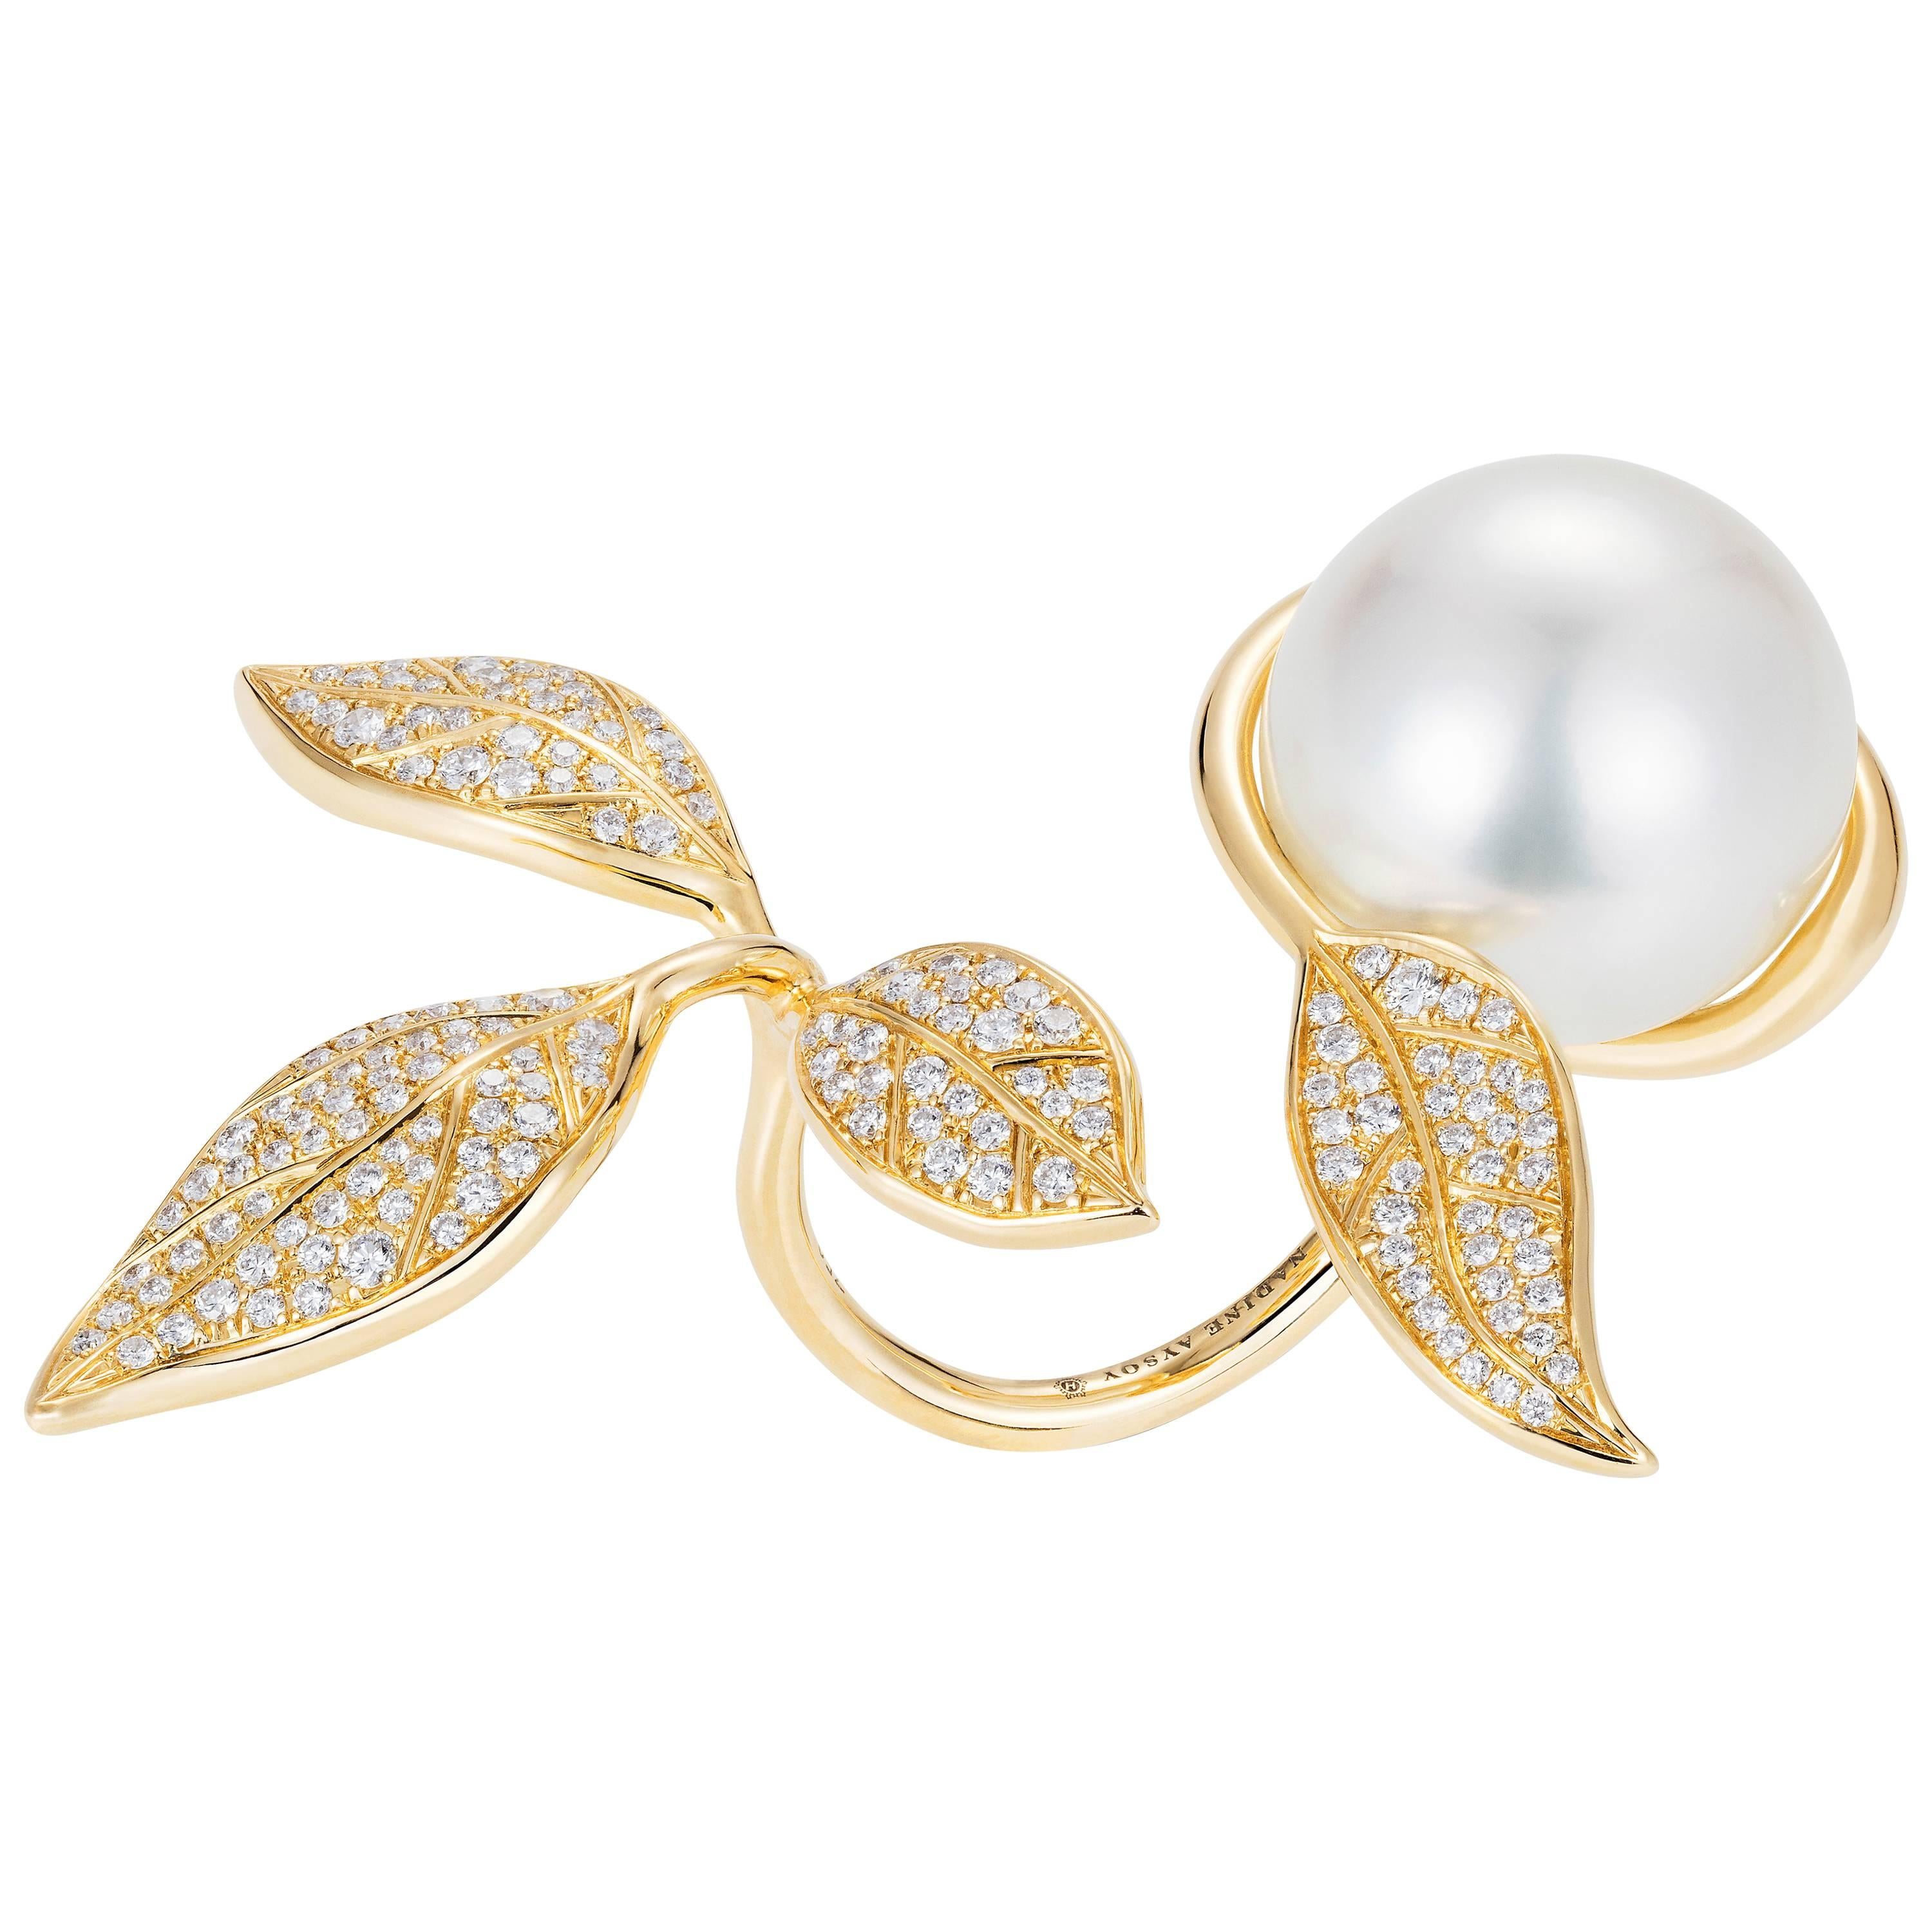 Nadine Aysoy 18Karat Yellow Gold, Diamond and South Sea Pearl Leaf Cocktail Ring For Sale